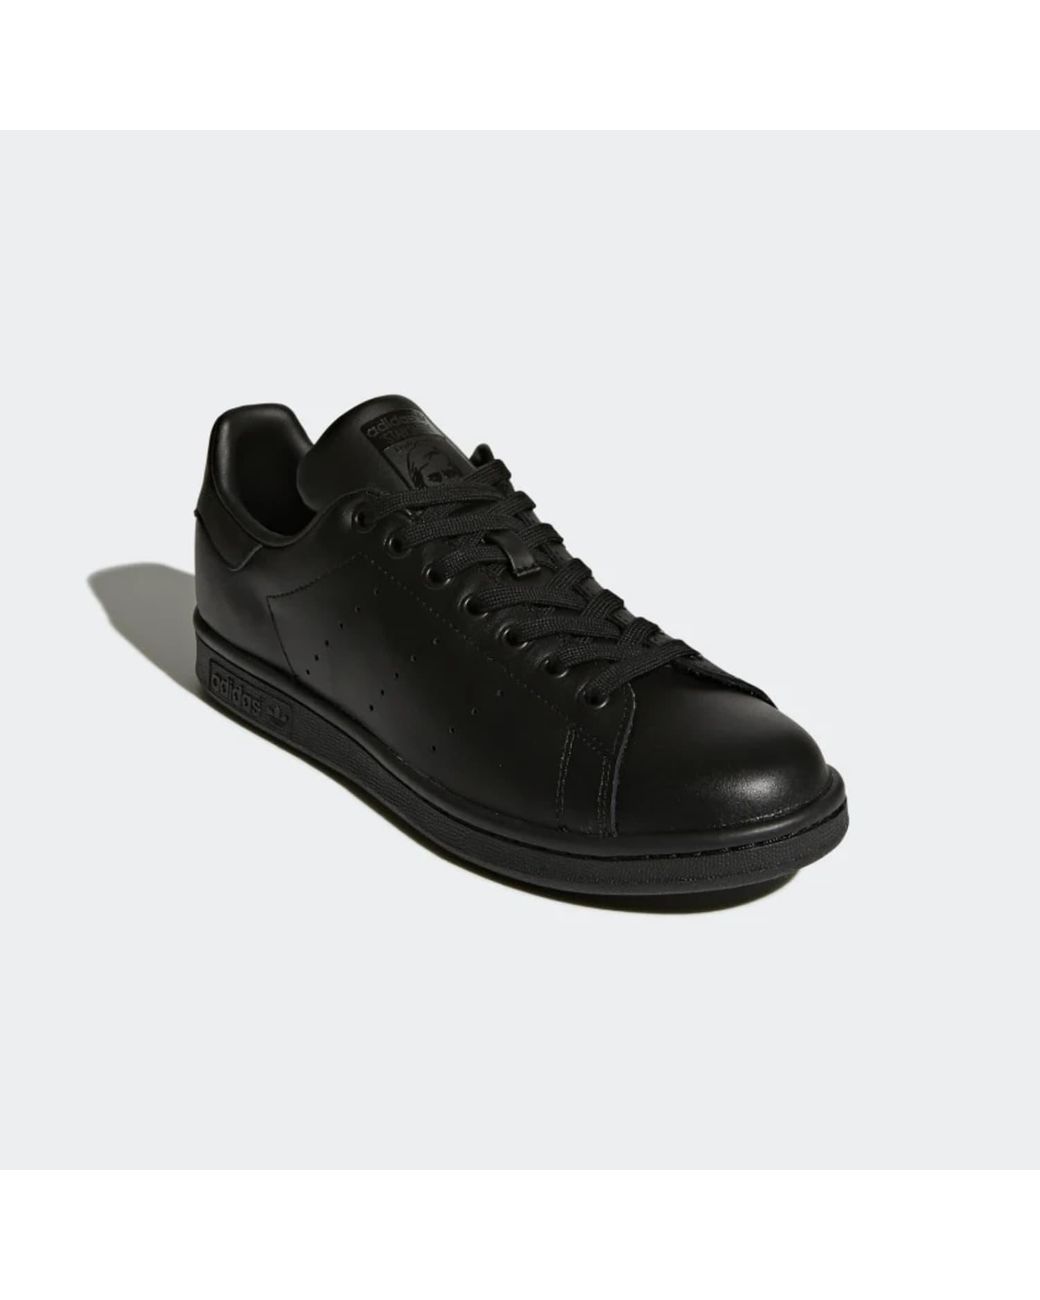 adidas Core Black Stan Smith M20327 Shoes for Men - Lyst